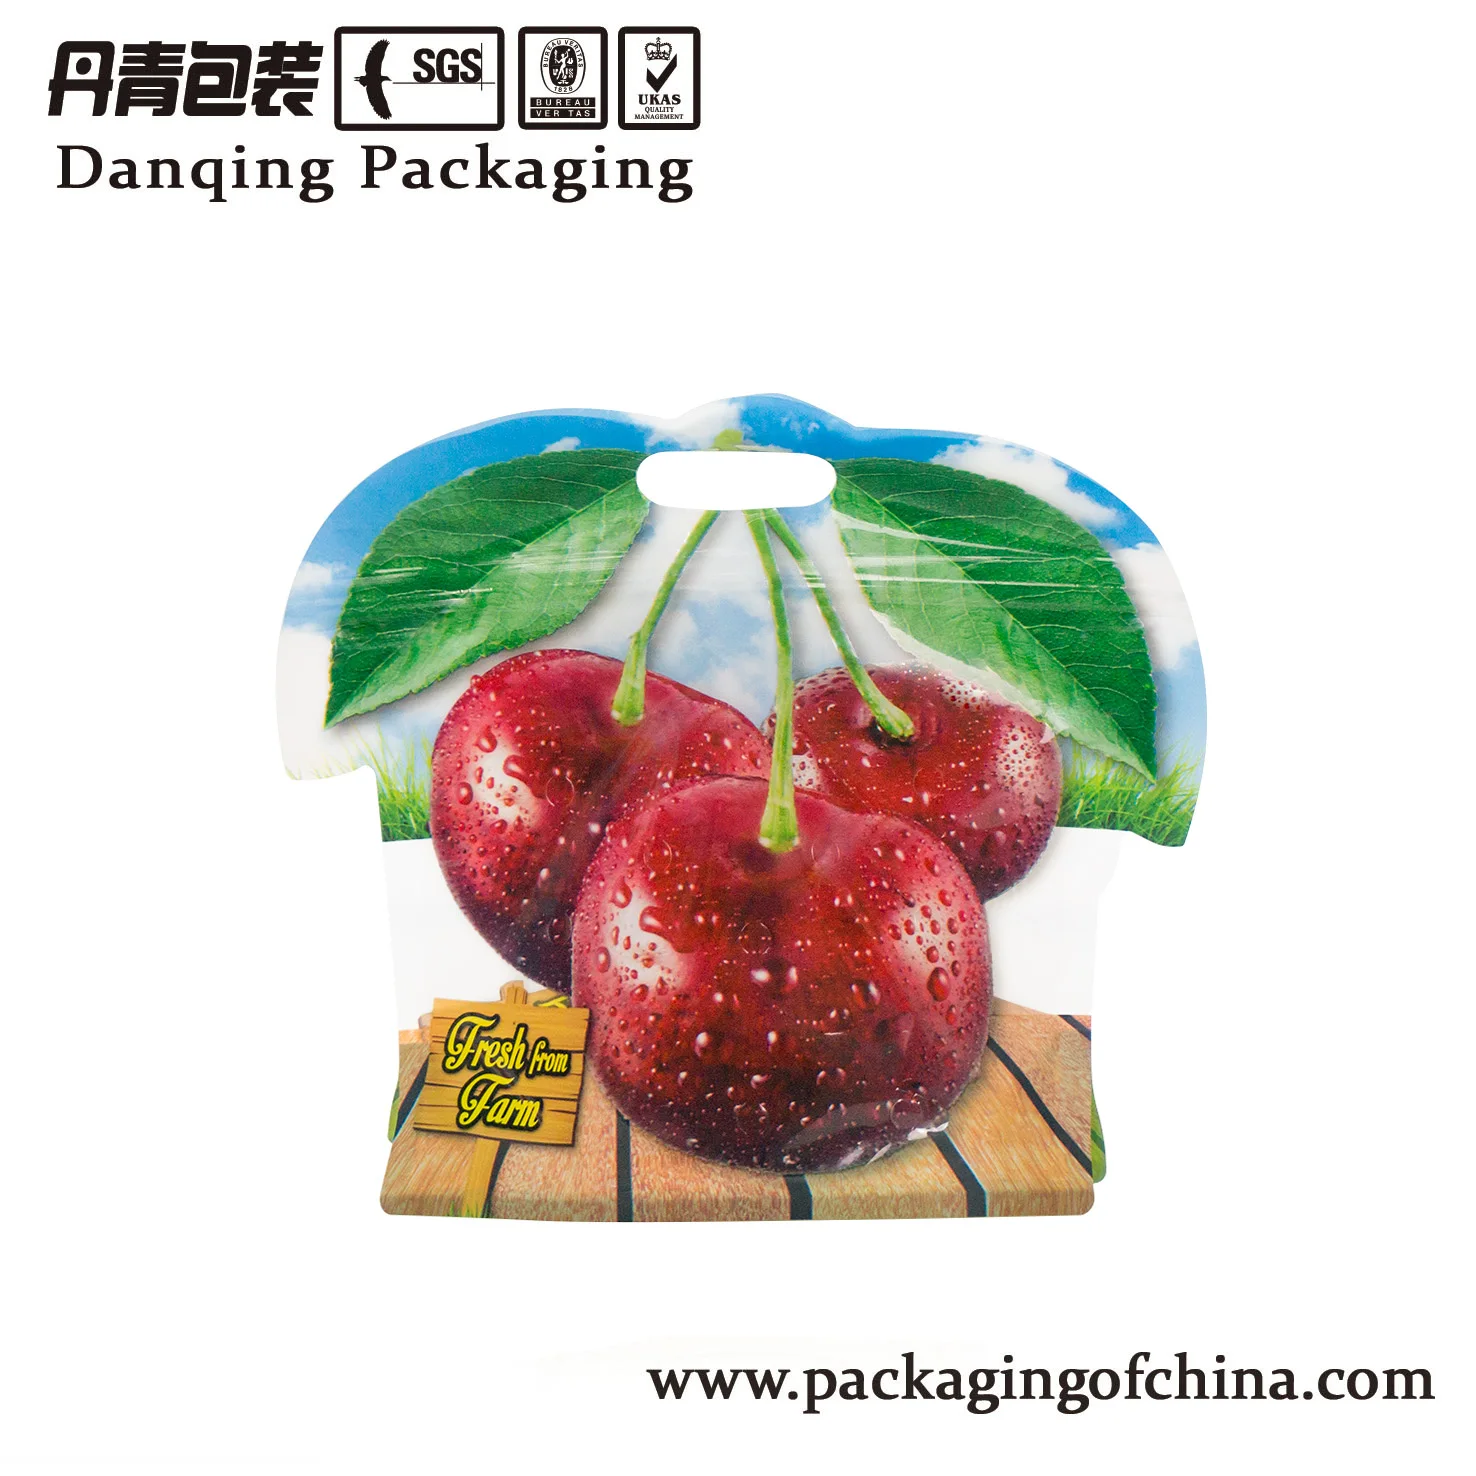 China suppliers DQ PACK New products stand up doypack for food packaging liquid pouch